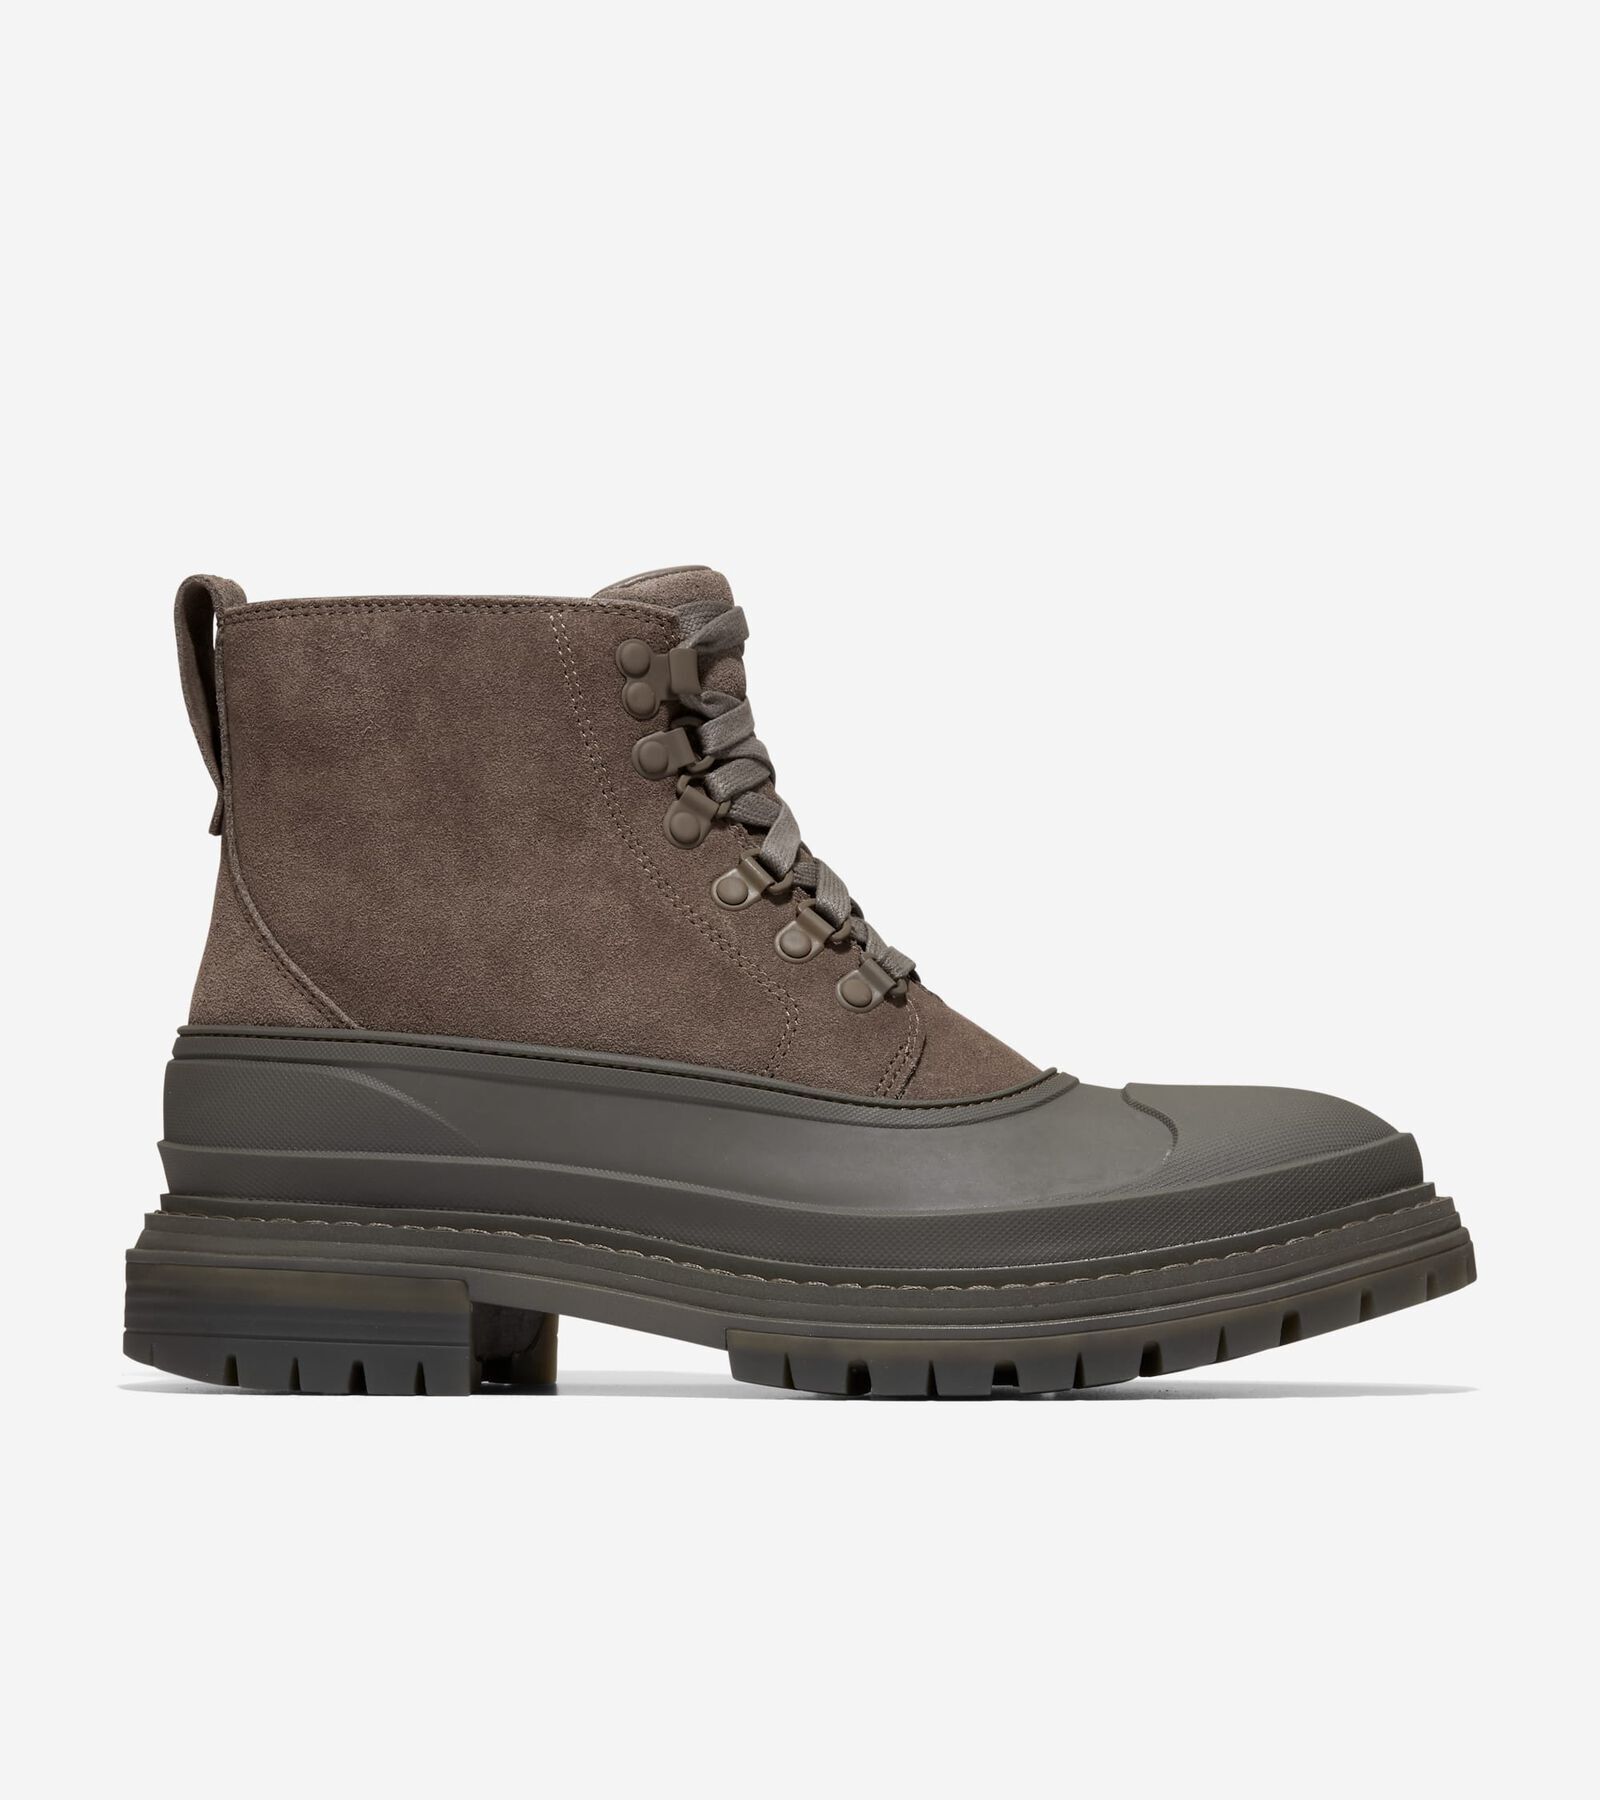 Cole Haan Stratton Shroud Boot - Morel-Deep Olive - Size: 8